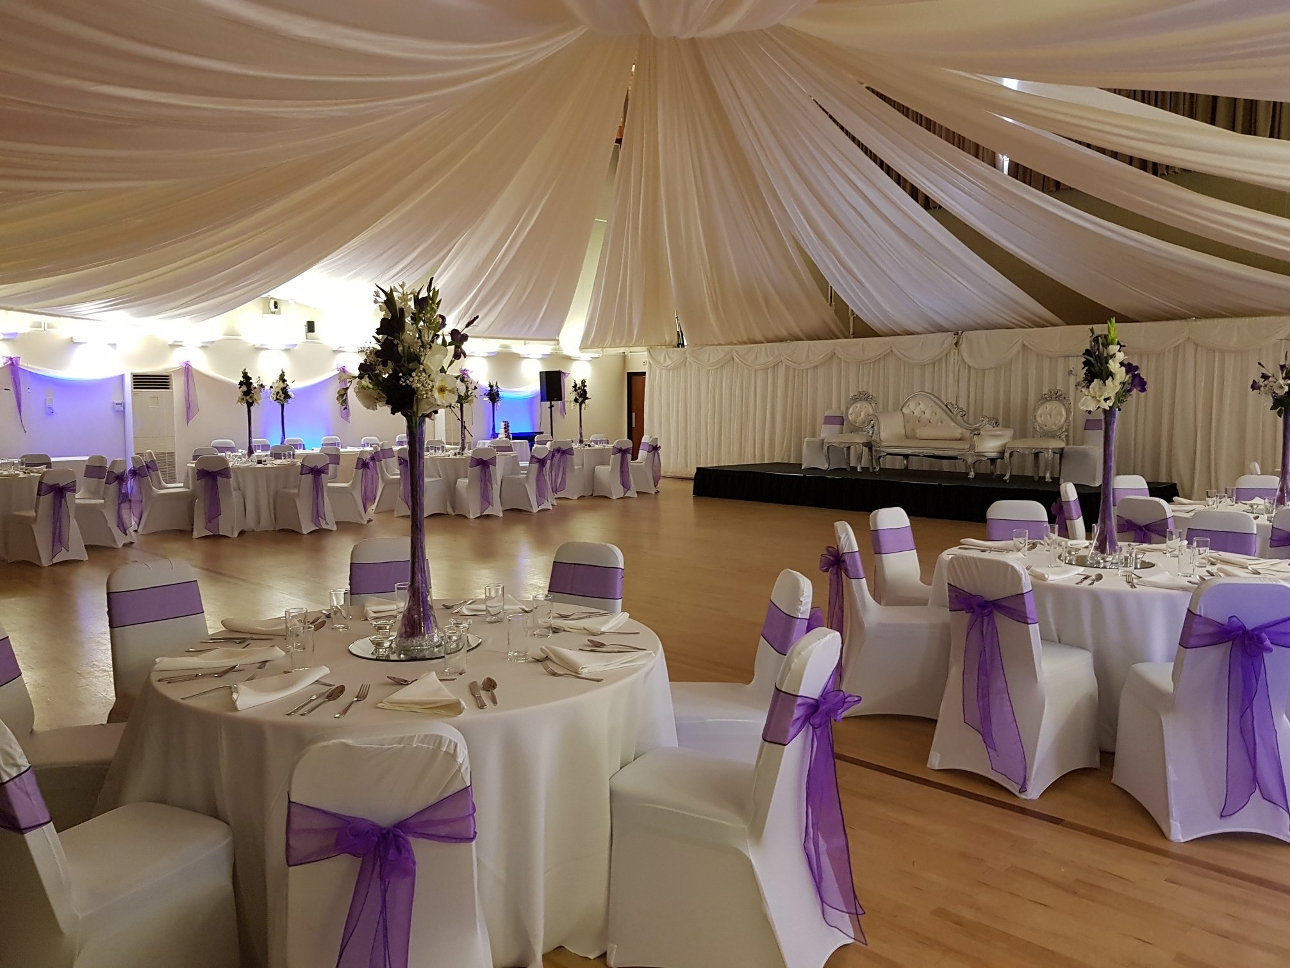 Inside The Rufus Centre with white draping and chairs with white chair covers set up for a ceremony